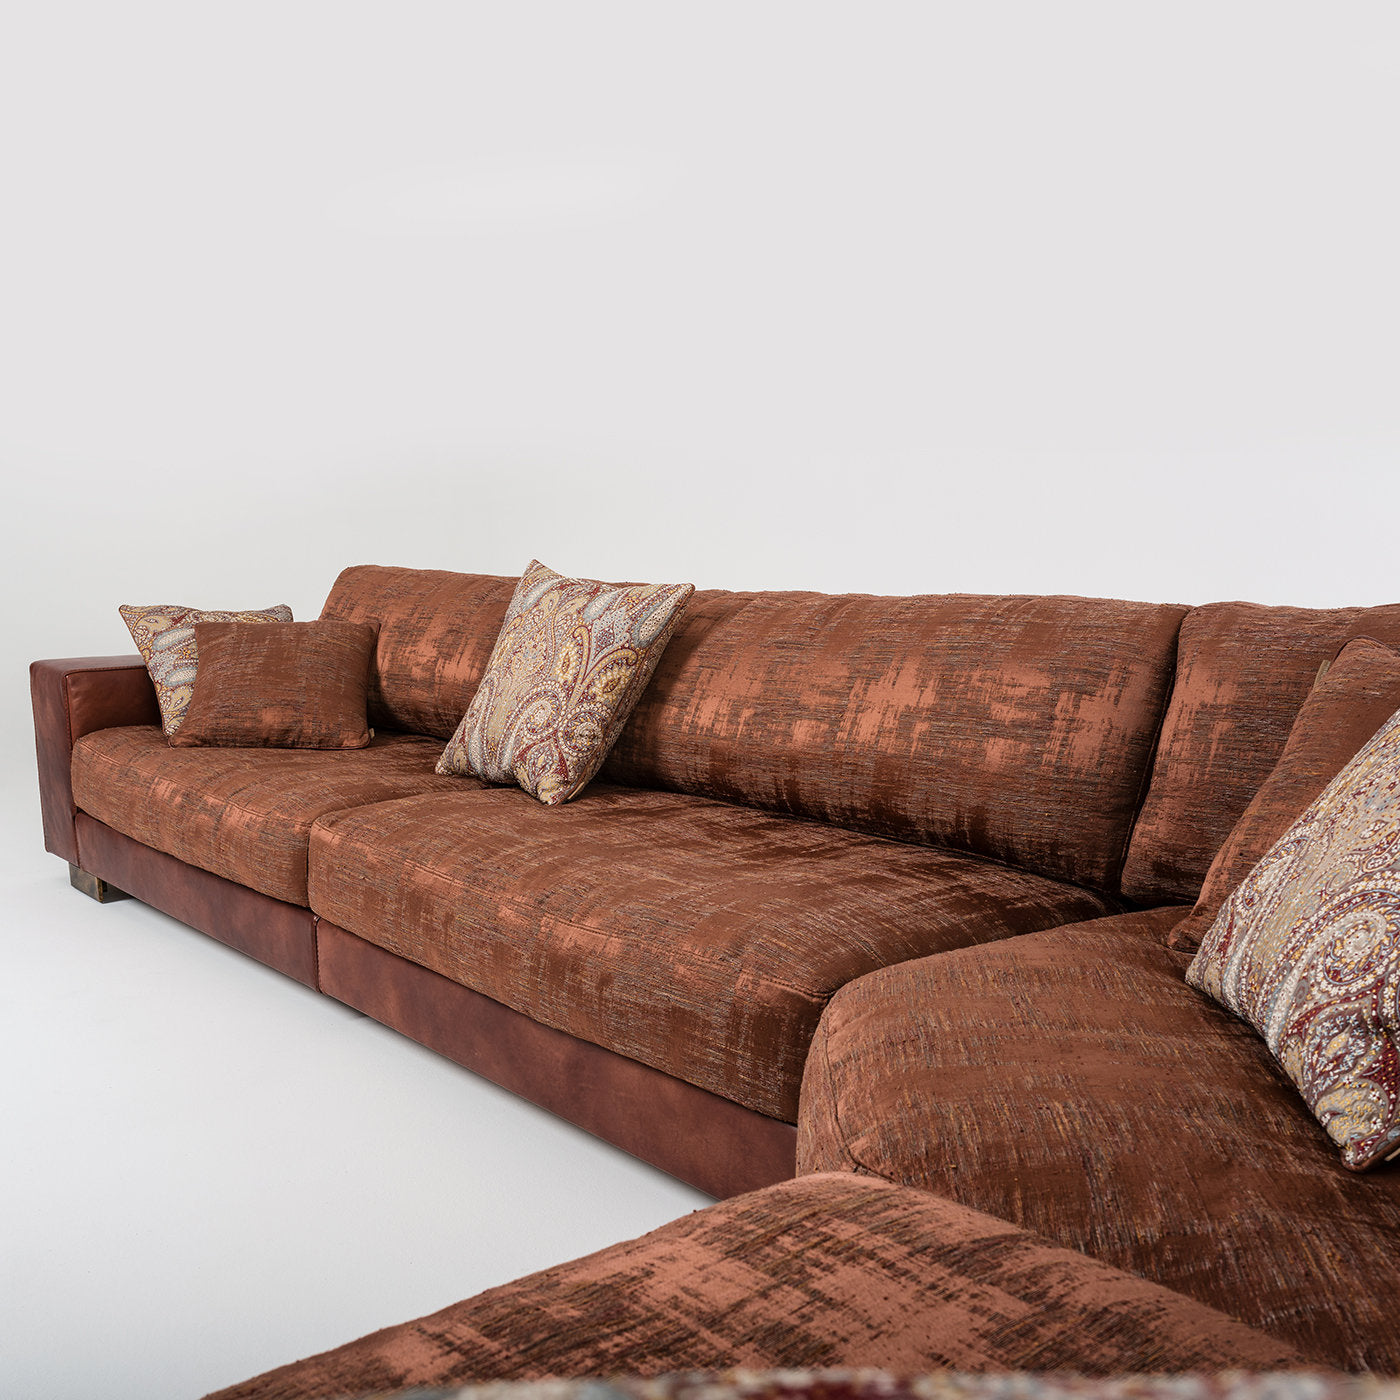 Glam Sofa Tribeca Collection by Marco and Giulio Mantellassi - Alternative view 1